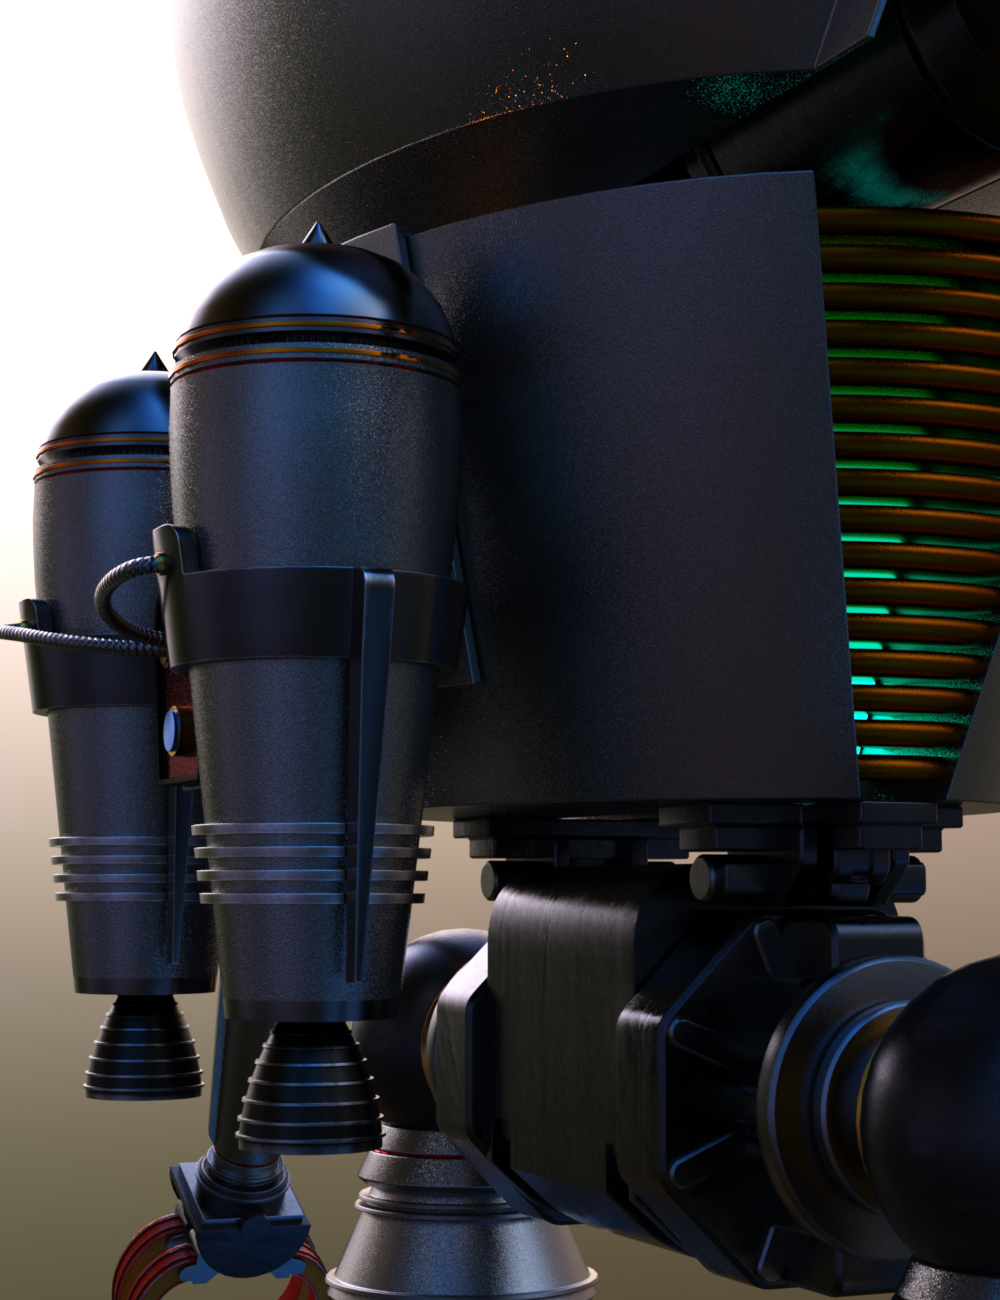 Robot X95A by: Those Things, 3D Models by Daz 3D